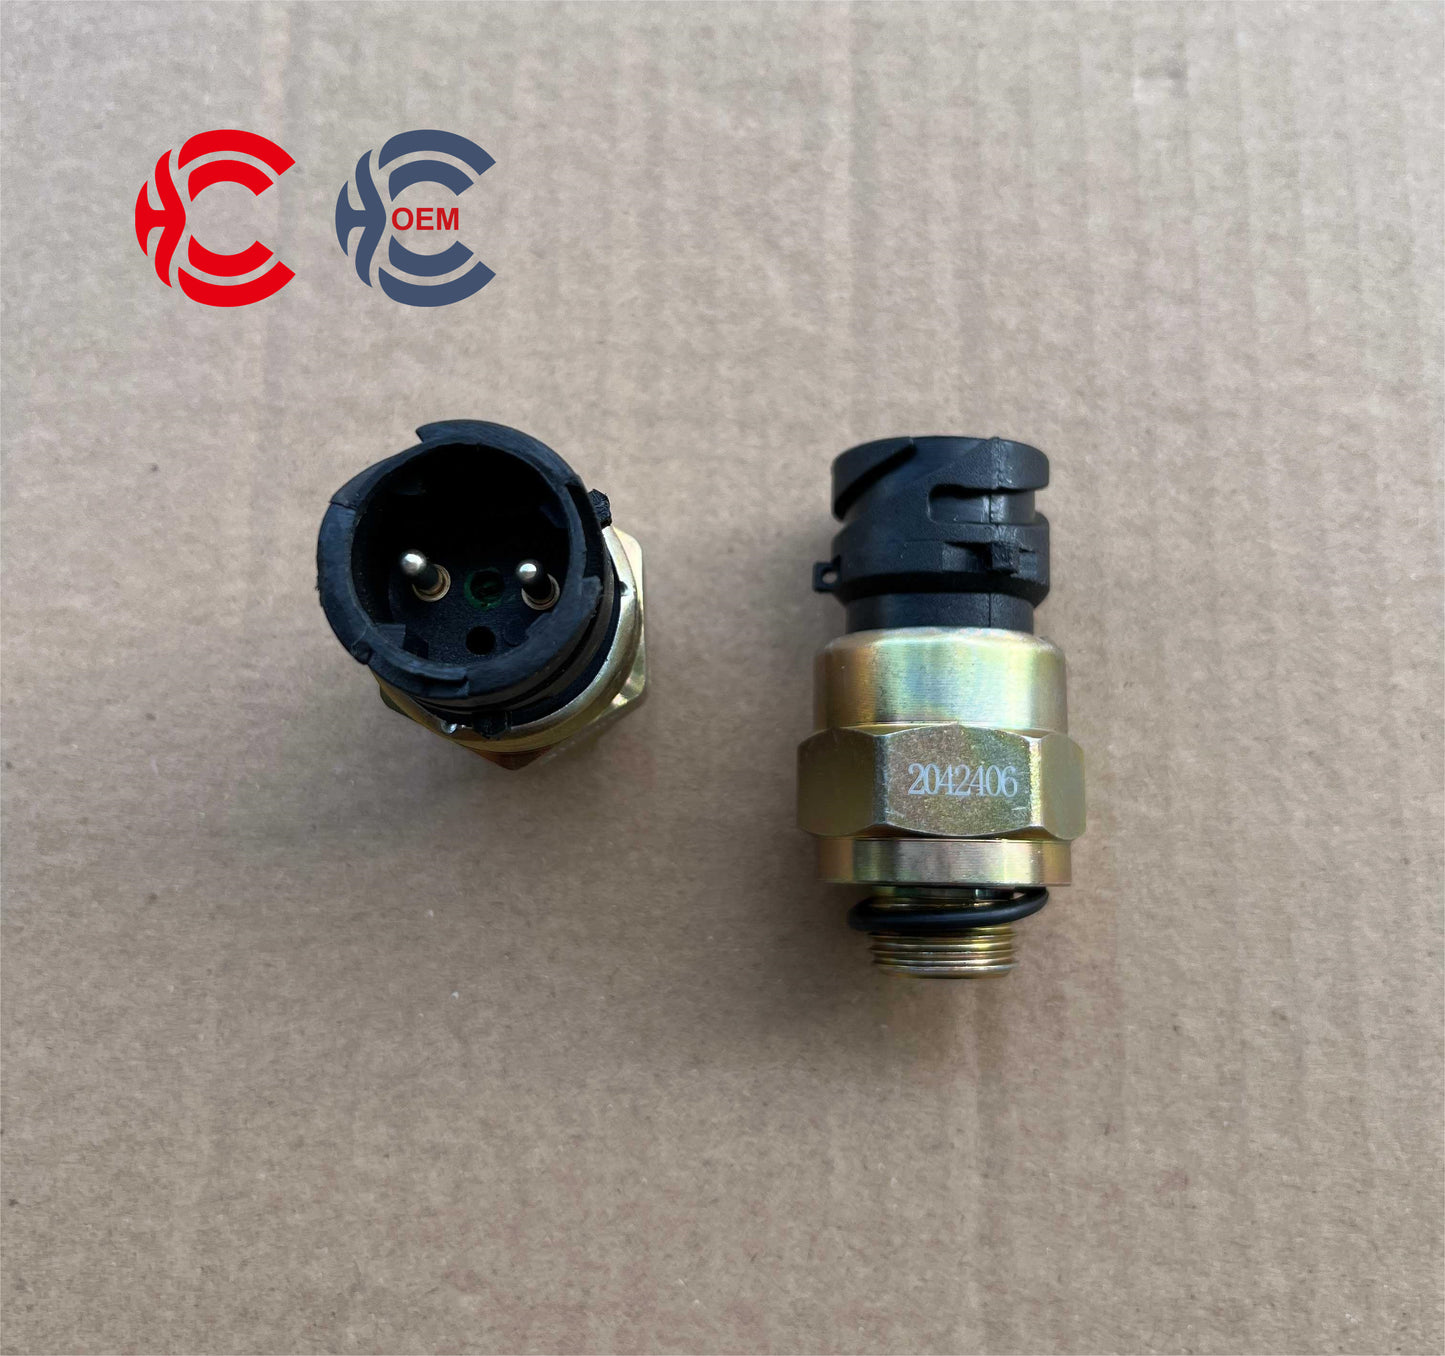 OEM: 2042406Material: ABS MetalColor: GoldenOrigin: Made in ChinaWeight: 100gPacking List: 1* Oil Pressure Sensor More ServiceWe can provide OEM Manufacturing serviceWe can Be your one-step solution for Auto PartsWe can provide technical scheme for you Feel Free to Contact Us, We will get back to you as soon as possible.